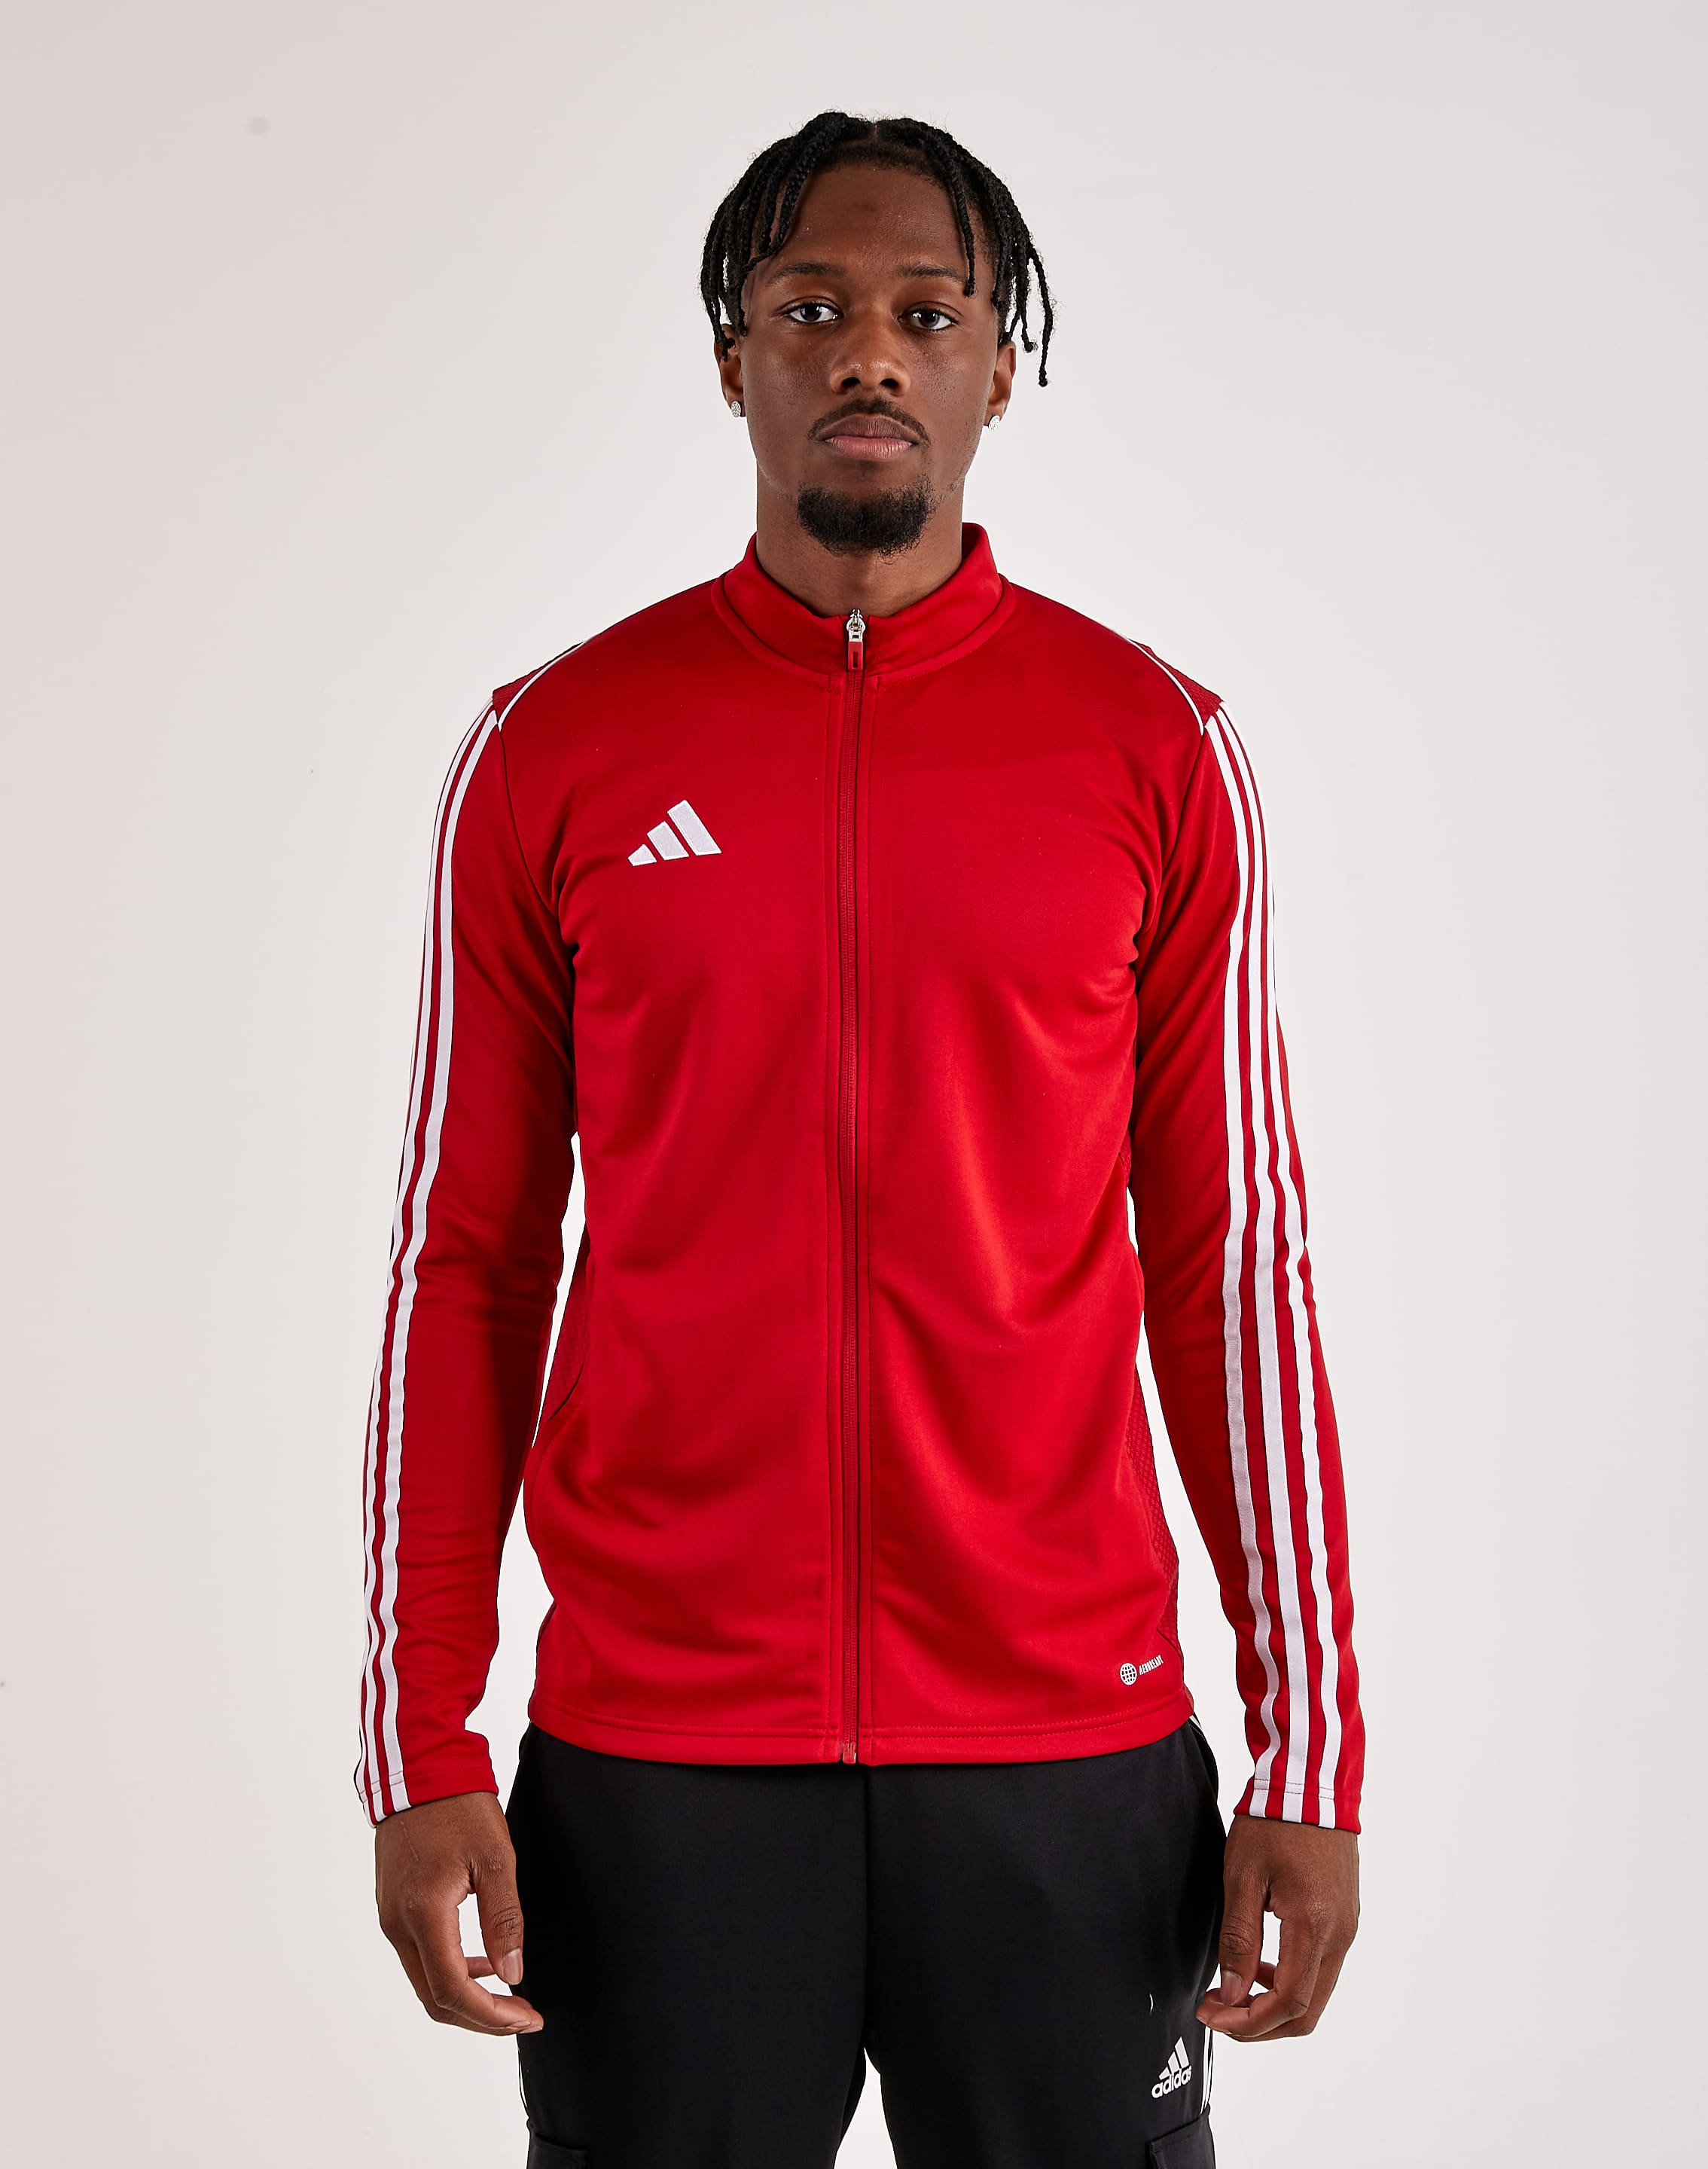 Adidas Football Tiro 23 Track Jacket In Red And White, 48% OFF